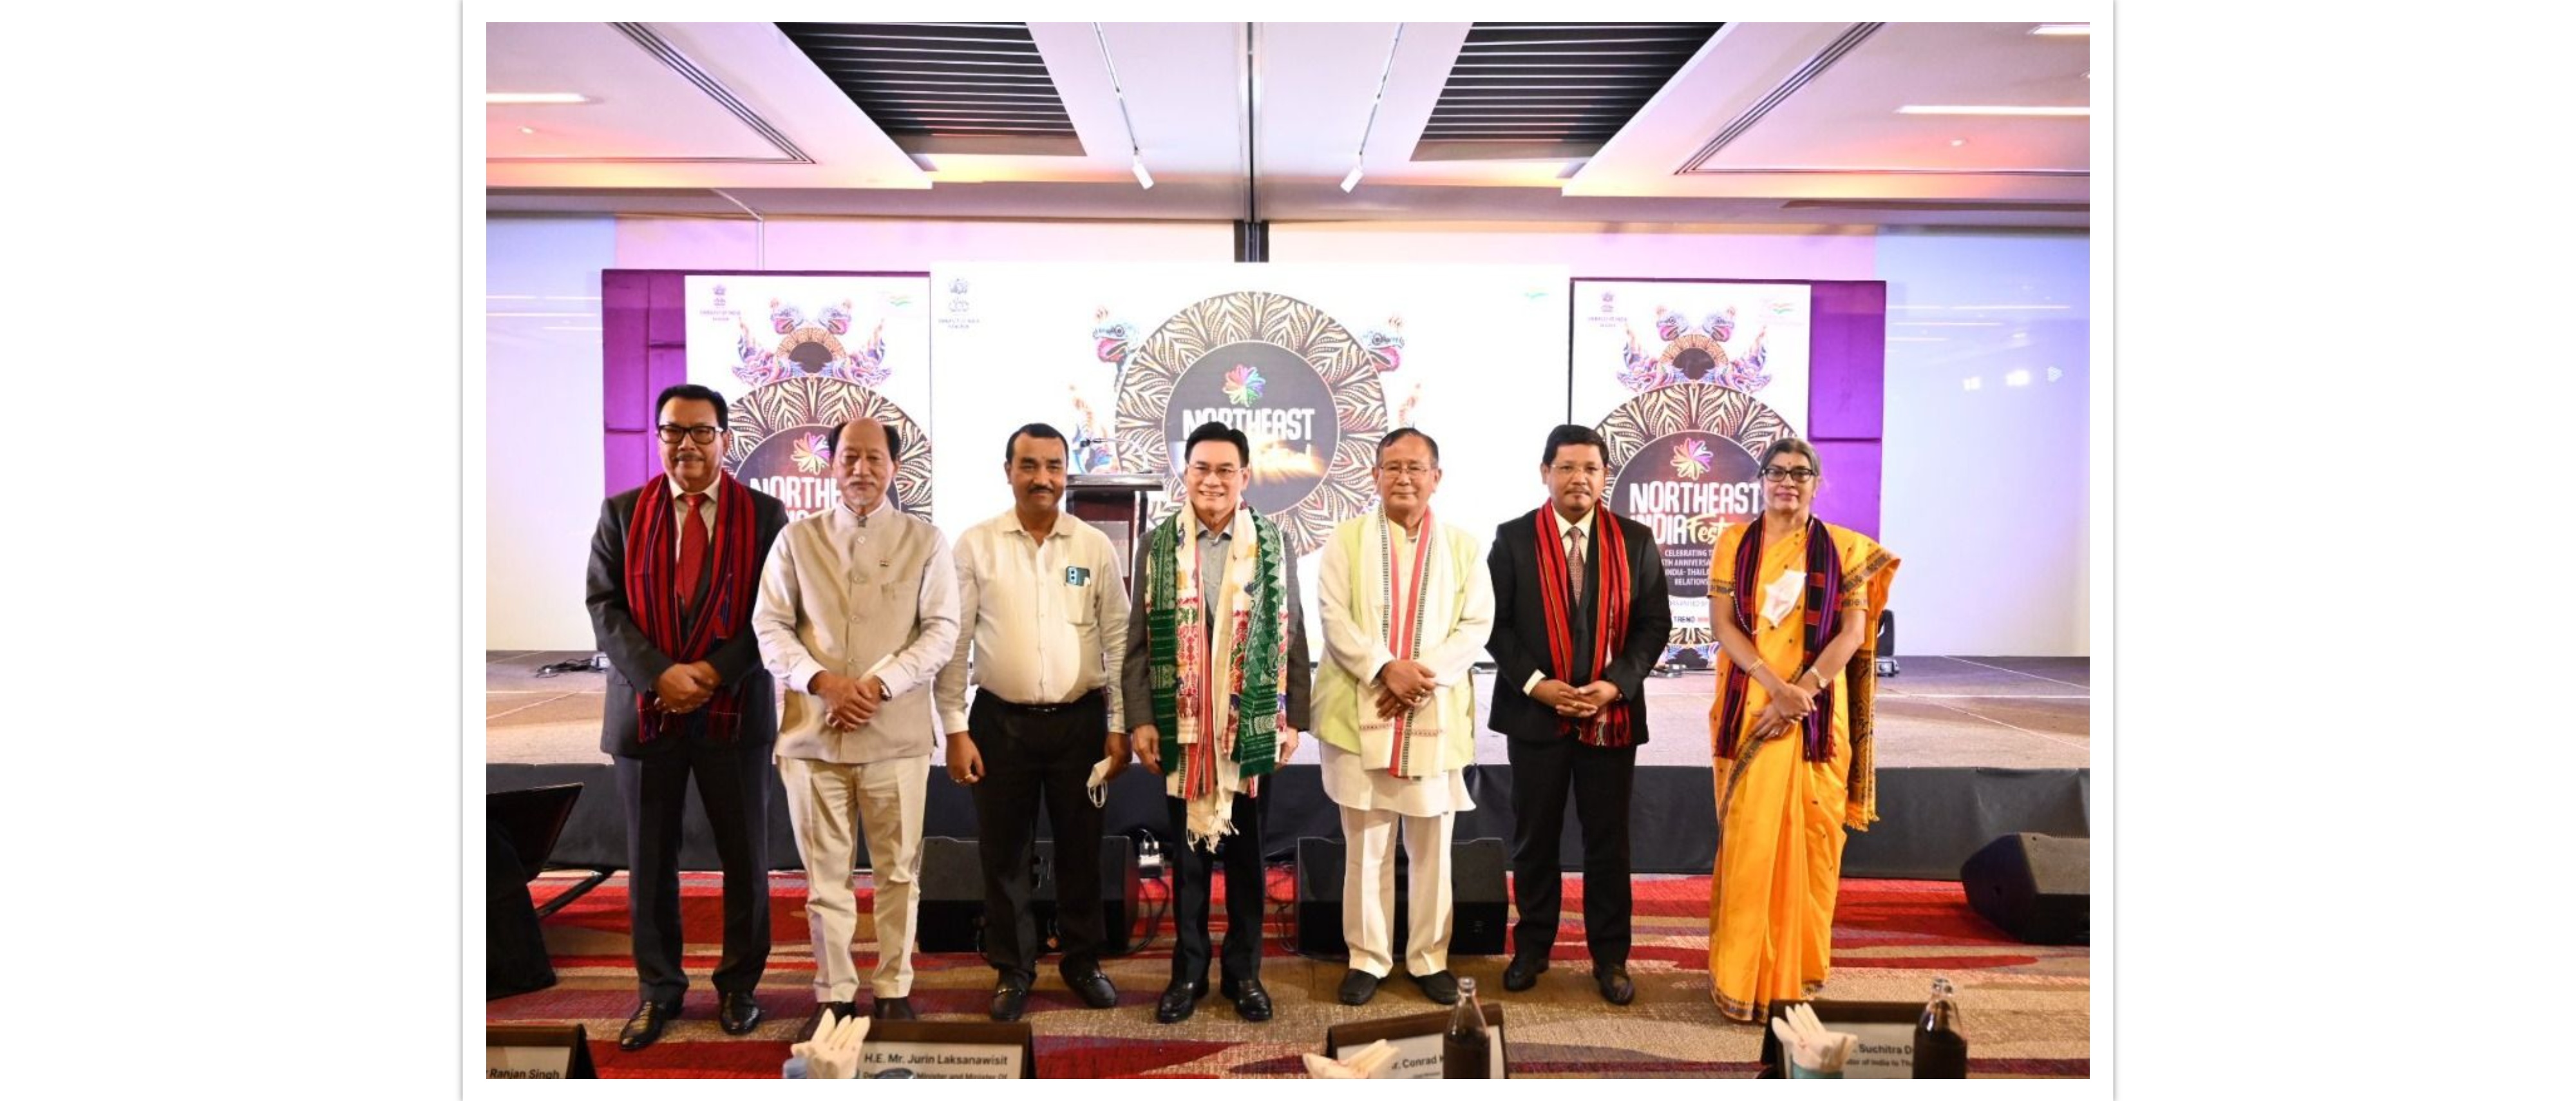  H.E. Mr. Jurin Laksanawisit, Deputy Prime Minister and Minister of Commerce of
Thailand, Minister of State for External Affairs Dr. Rajkumar Ranjan Singh, Chief
Minister of Nagaland Shri Neiphiu Rio, Chief Minister of Meghalaya Shri. Conrad K.
Sangma and Dy Chief Minister of Arunachal Pradesh Shri Chowna Mein attended the
Inaugural Session of the 2 nd NEIF.